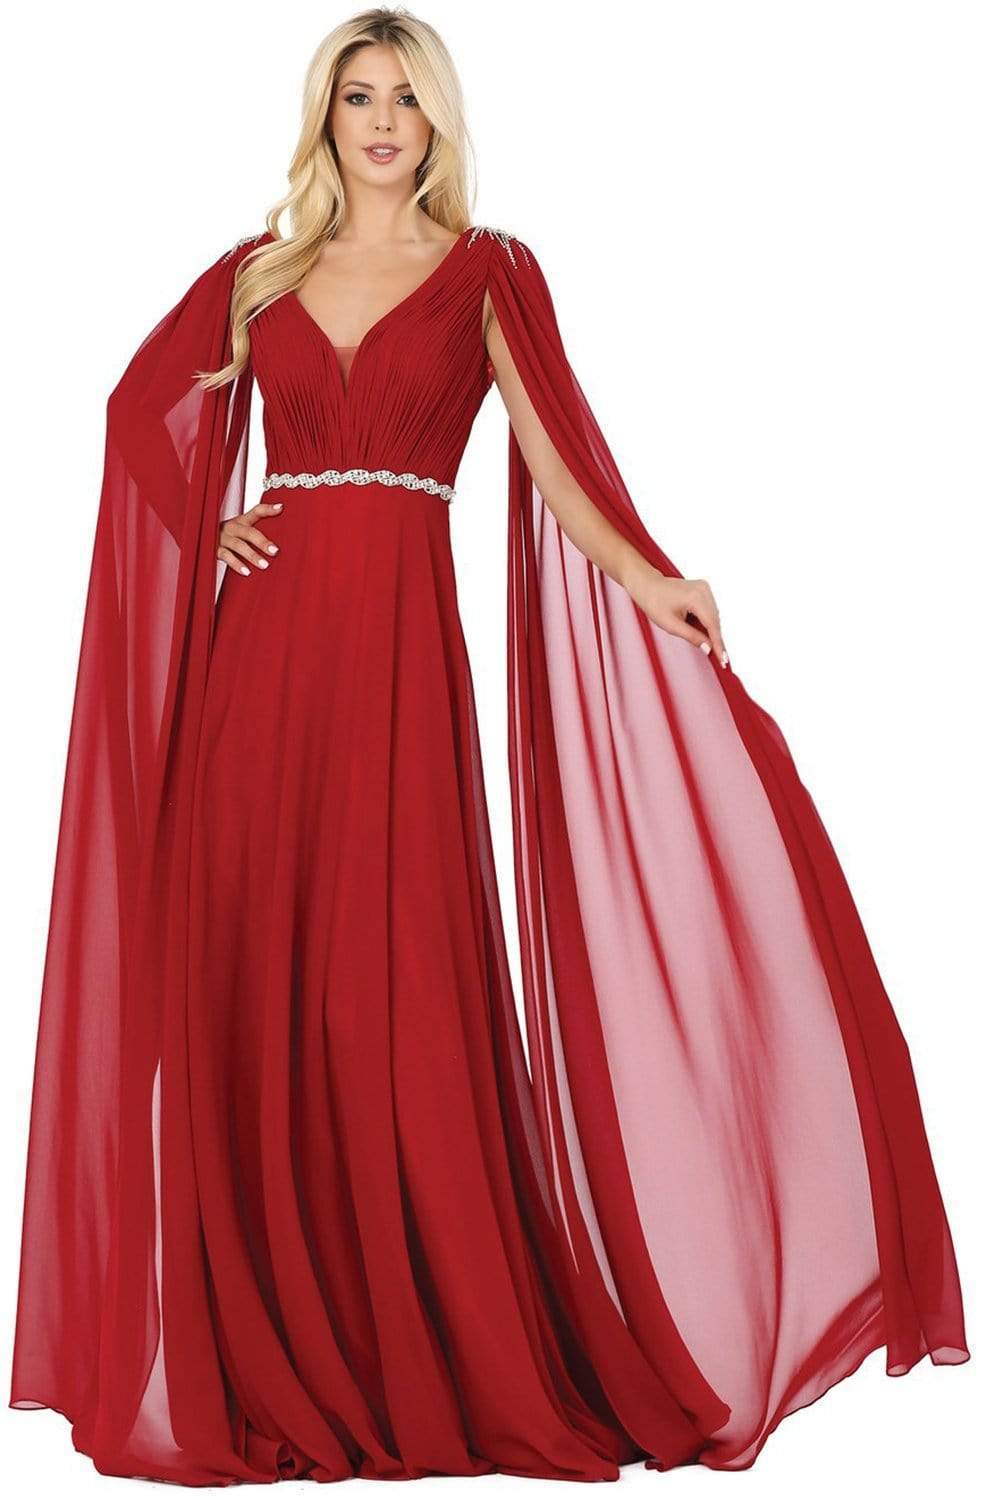 Dancing Queen - 2991 Embellished Plunging V-neck A-line Gown
